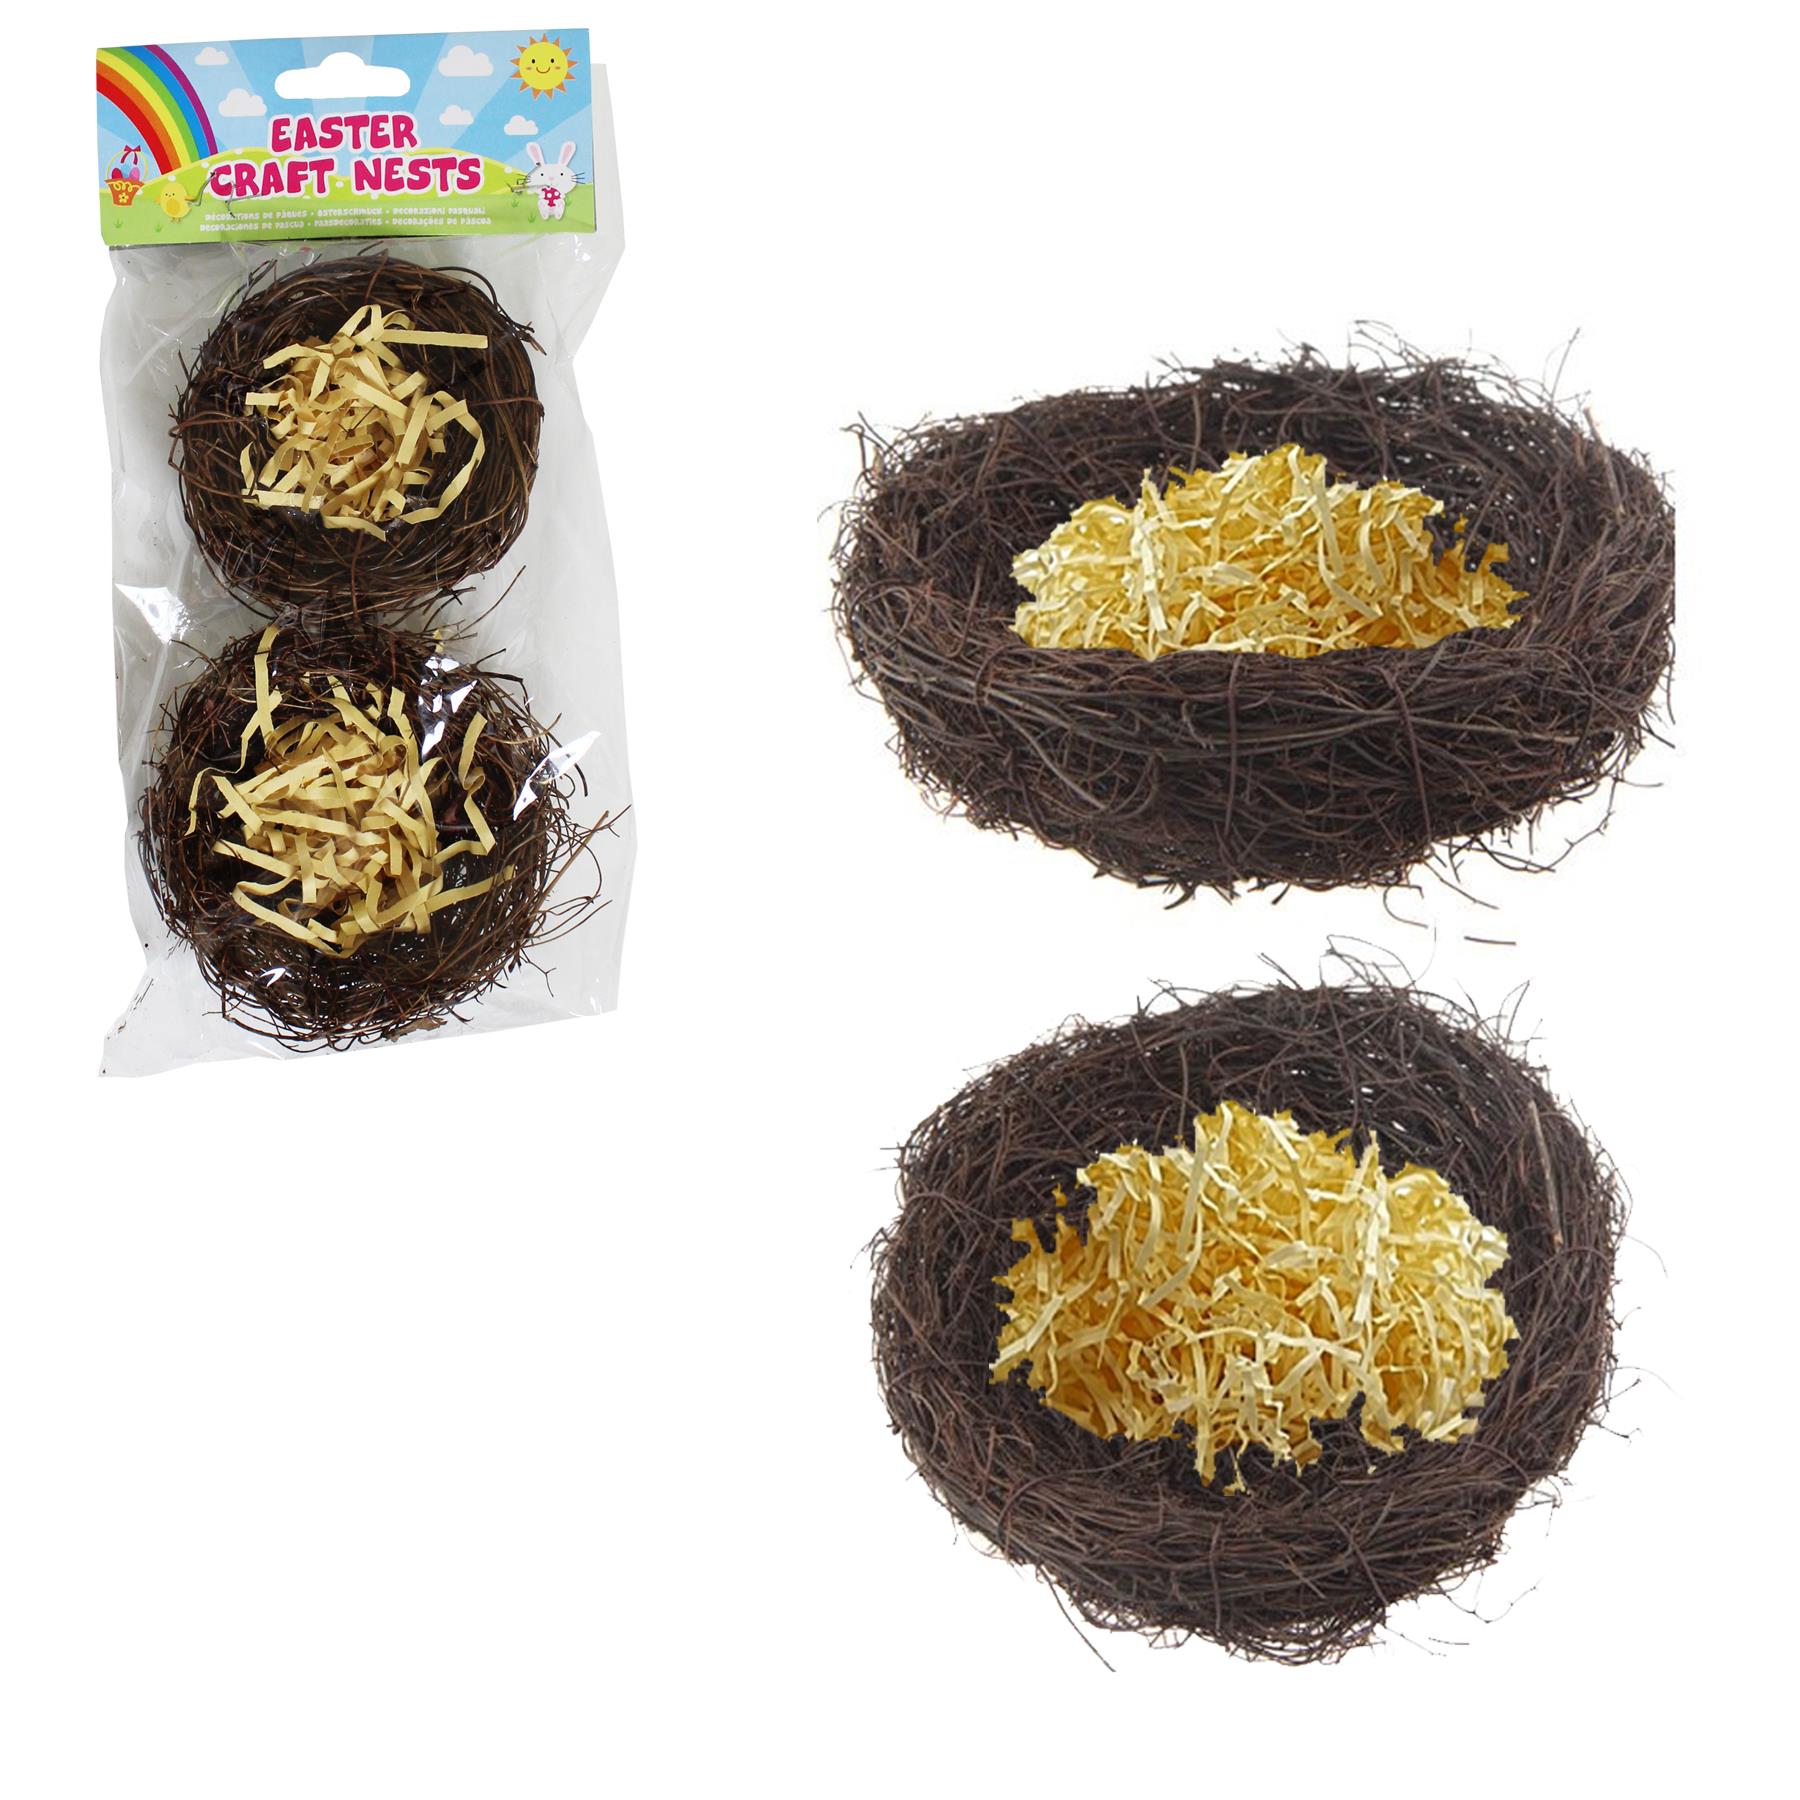 Easter Decorations, Bonnet Making, Arts and Crafts - 2 Pack Craft Nests